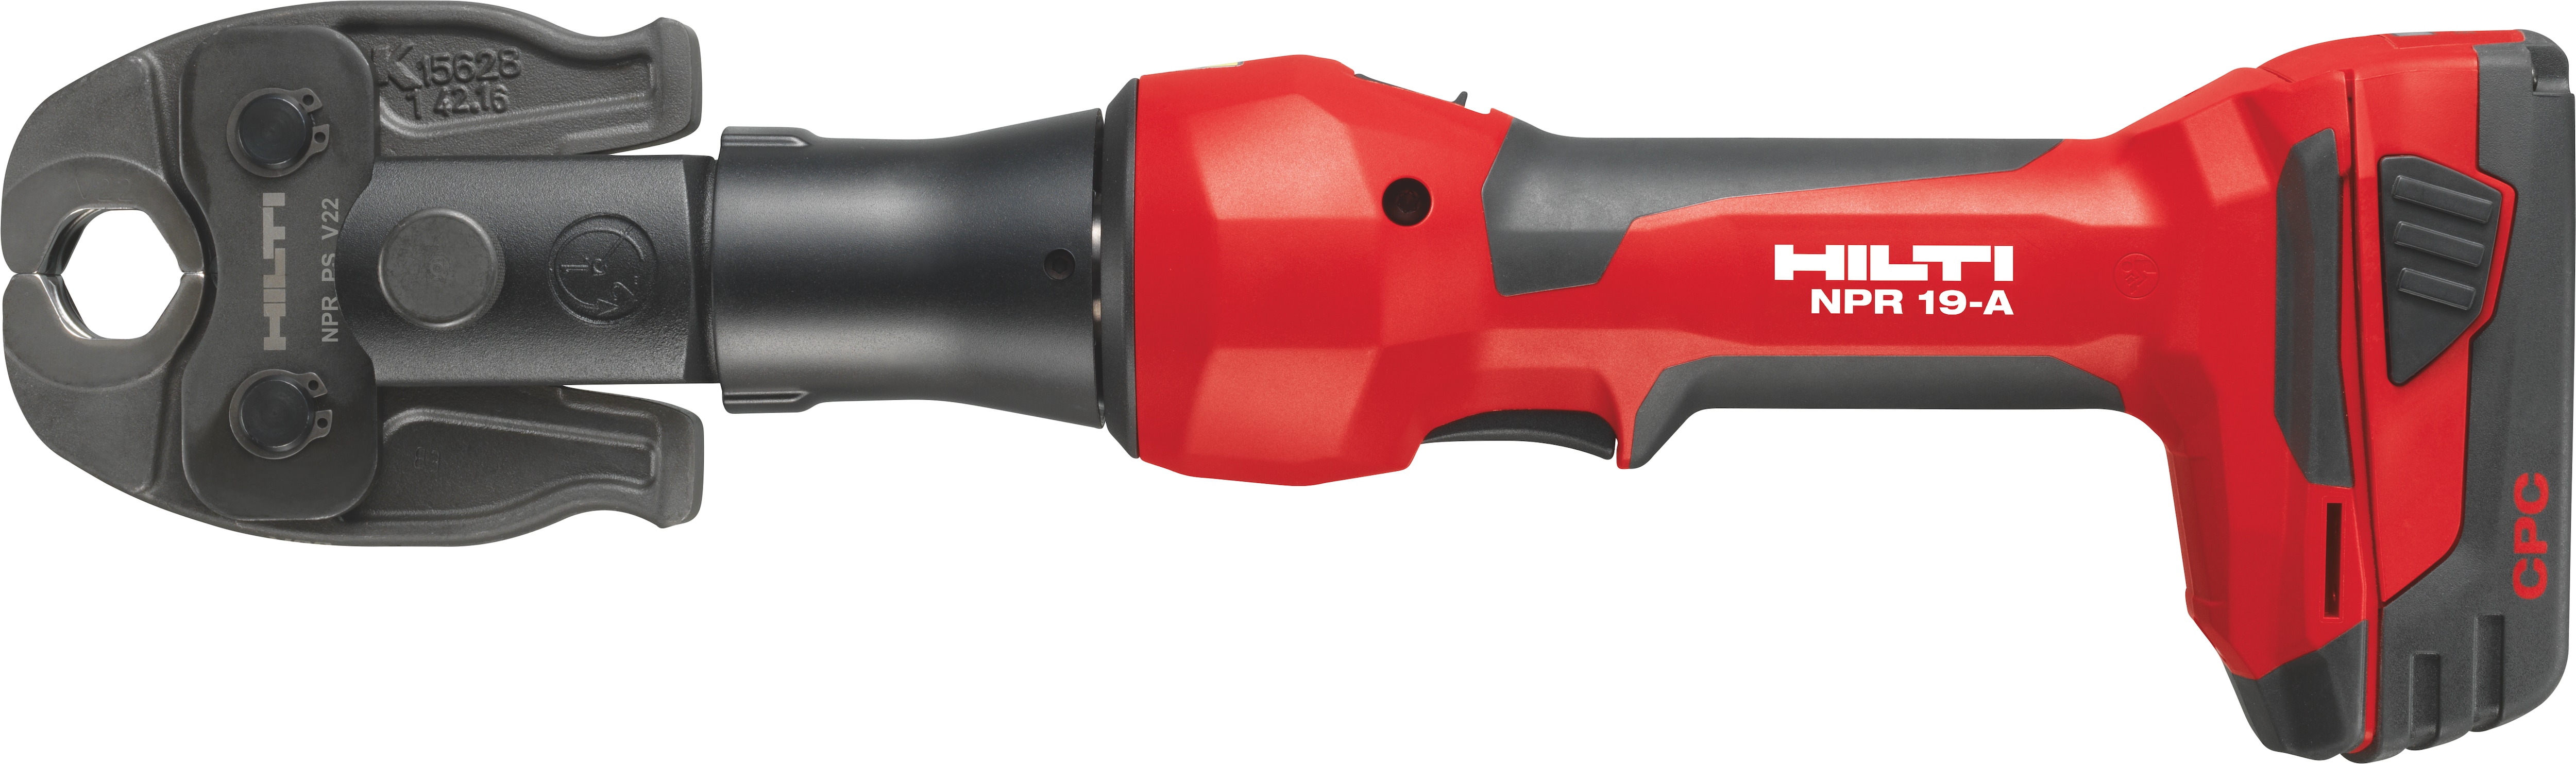 NPR 19-A cordless pipe press tool and jaw